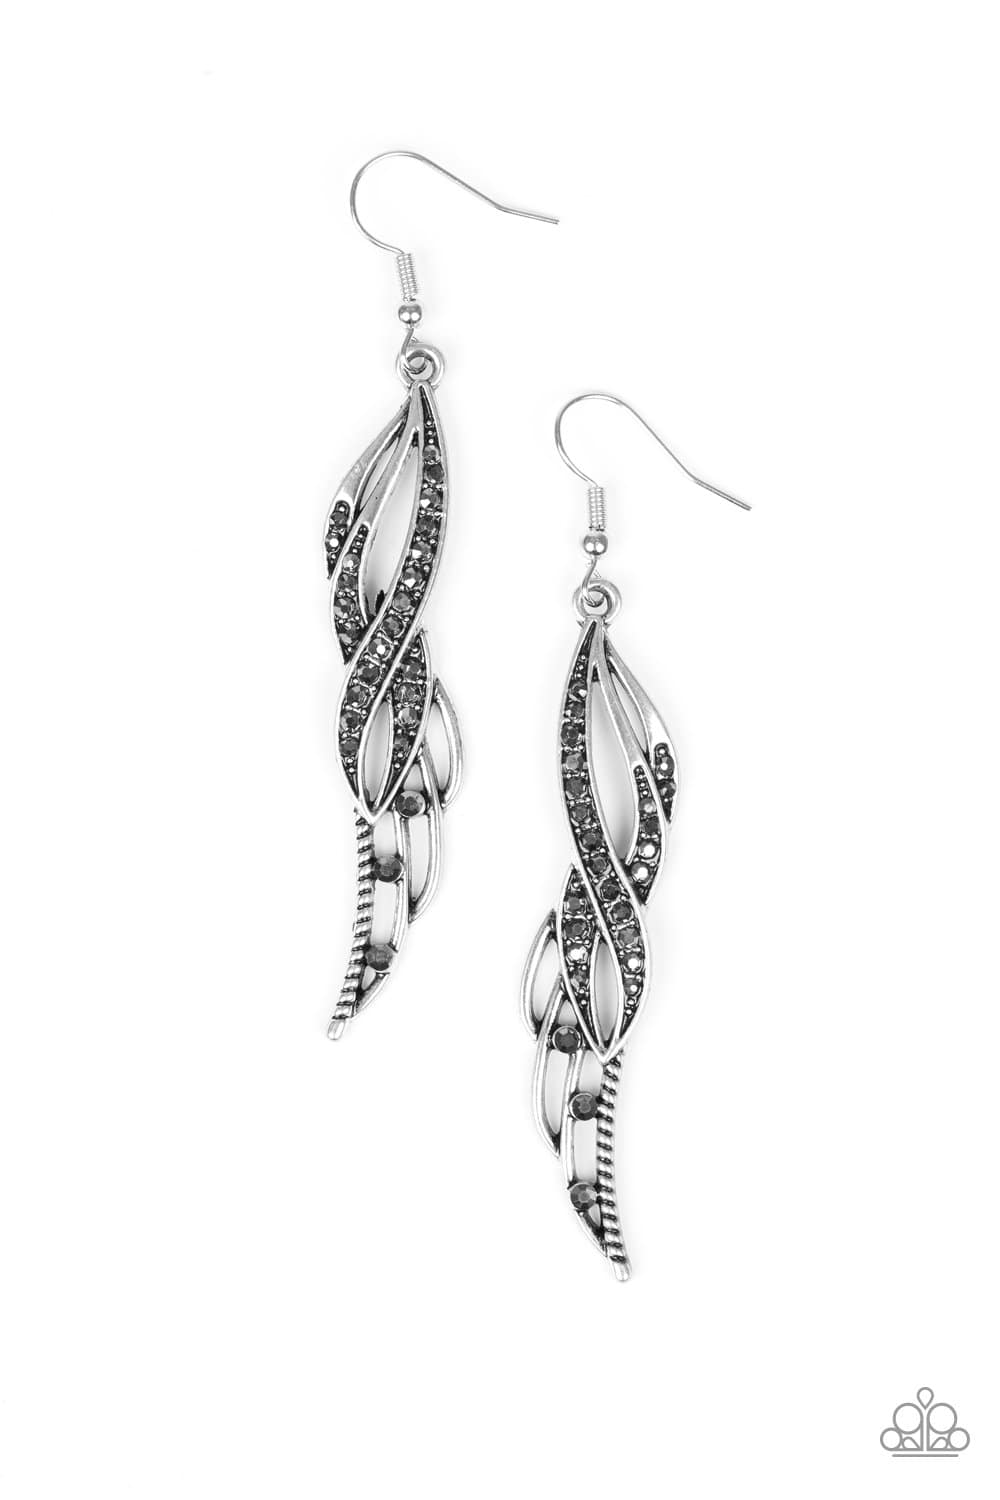 Let Down Your Wings - Silver Hematite Rhinestone Earrings - Paparazzi Accessories - GlaMarous Titi Jewels